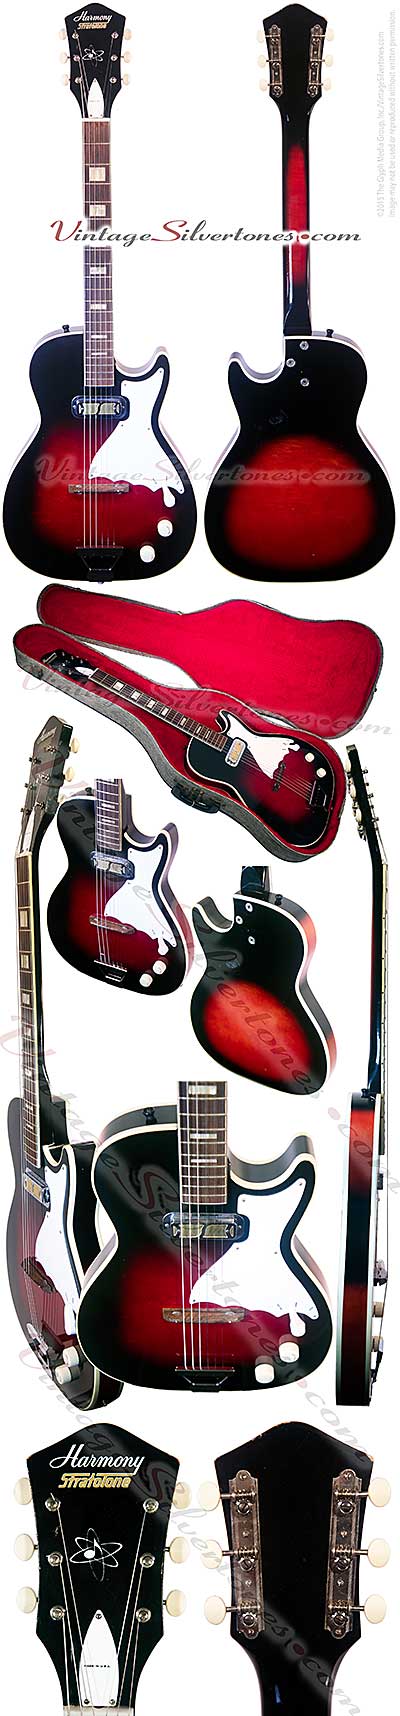 Harmony H47 - Stratotone - one pickup, redburst, hollow body electric guitar made in Chicago IL USA circa 1961